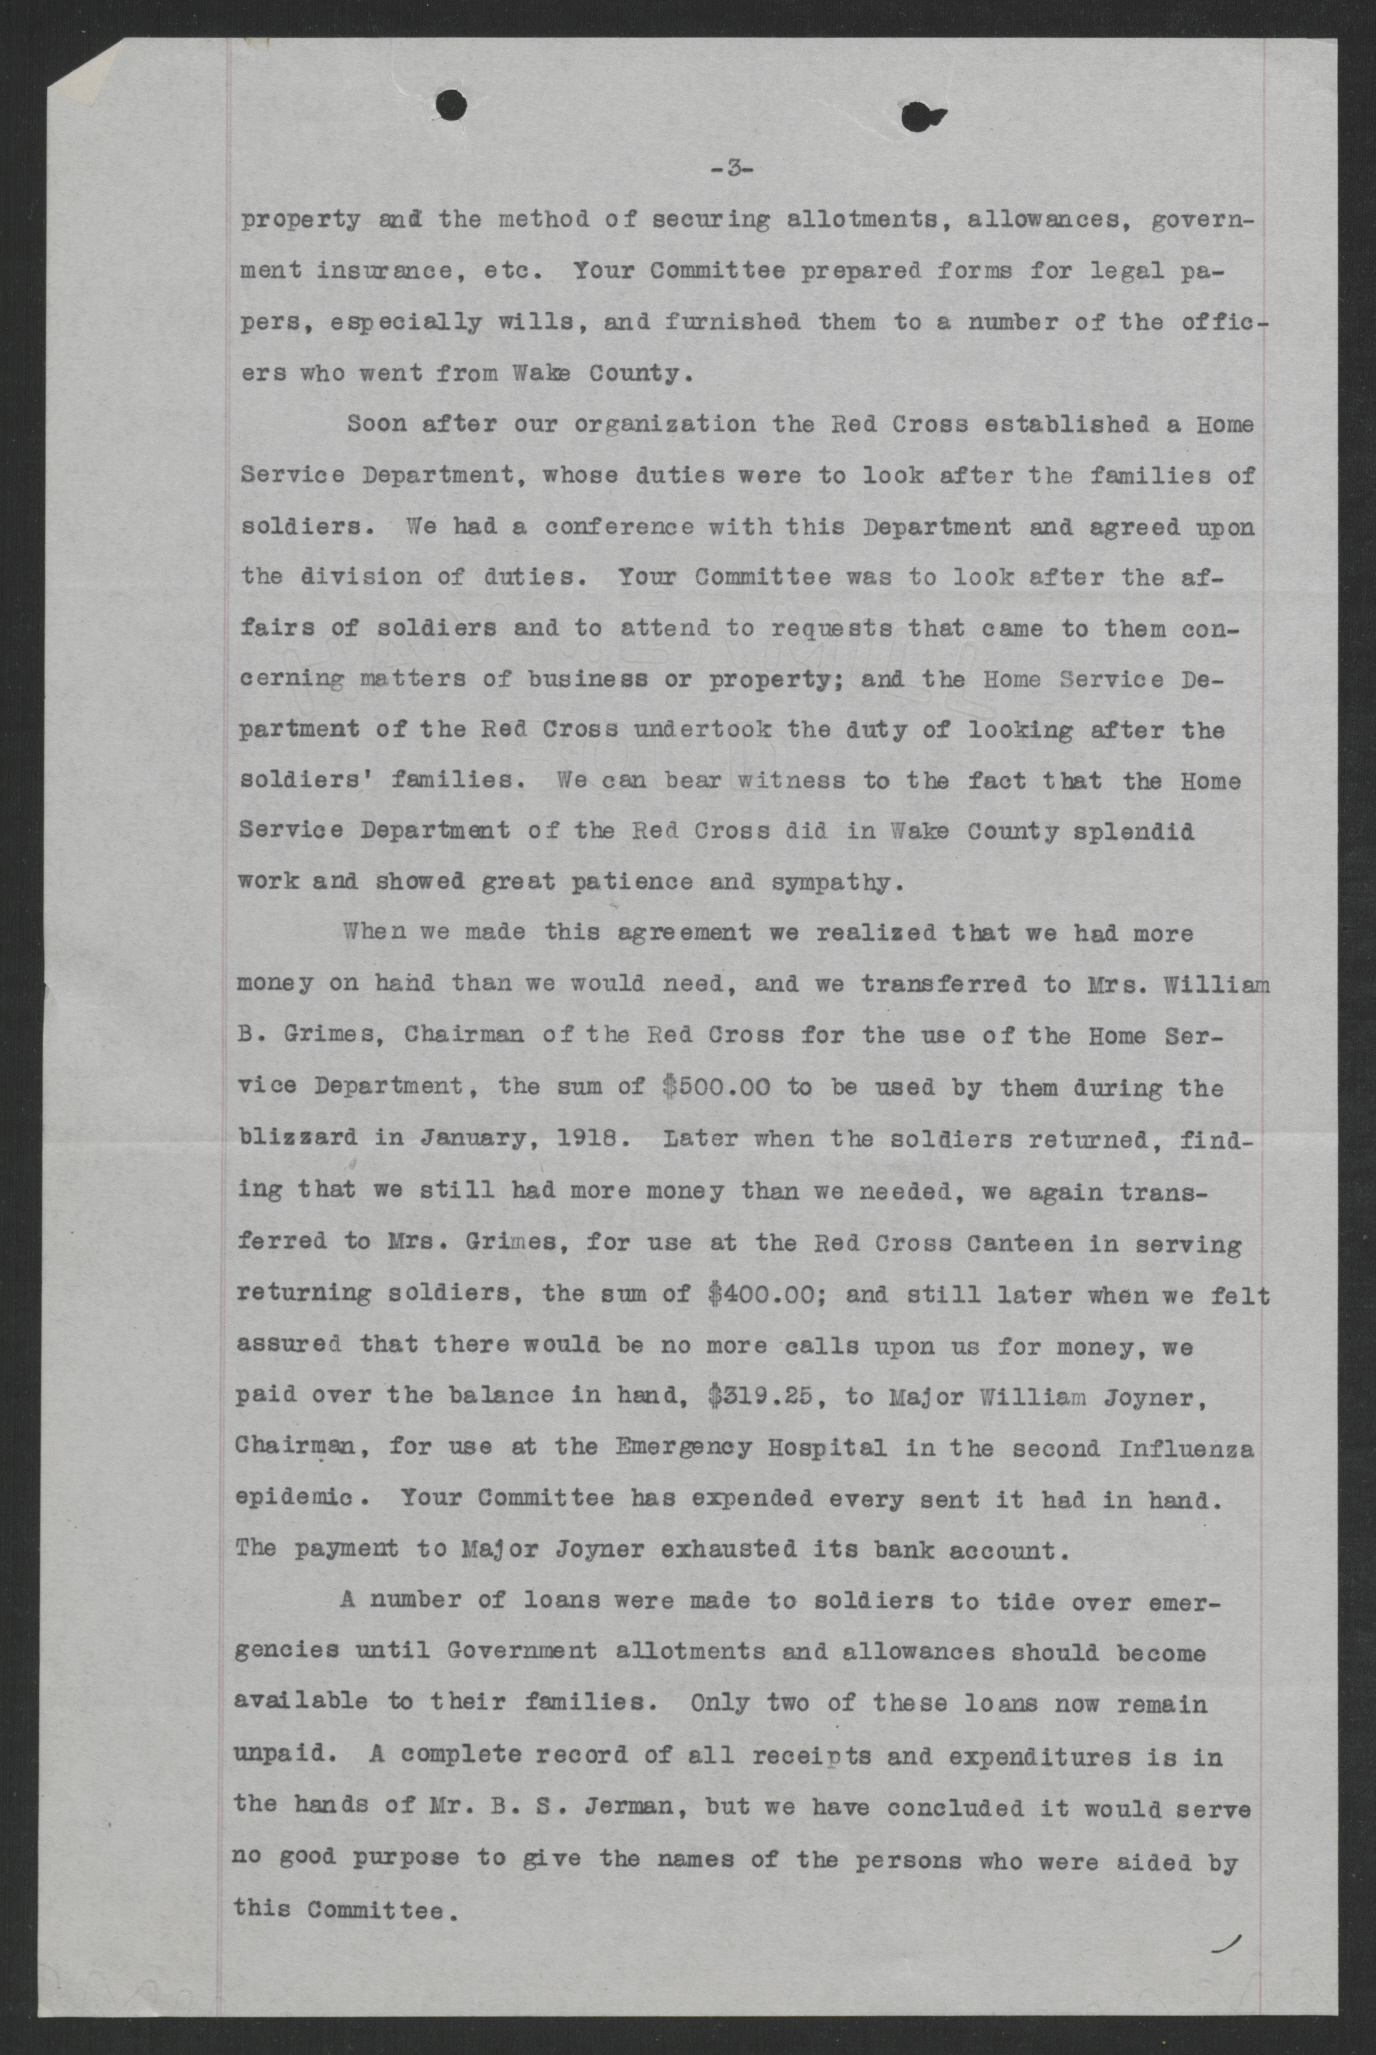 Letter from the Soldiers' Business Aid Committee of Wake County to Thomas W. Bickett, May 20, 1920, page 3